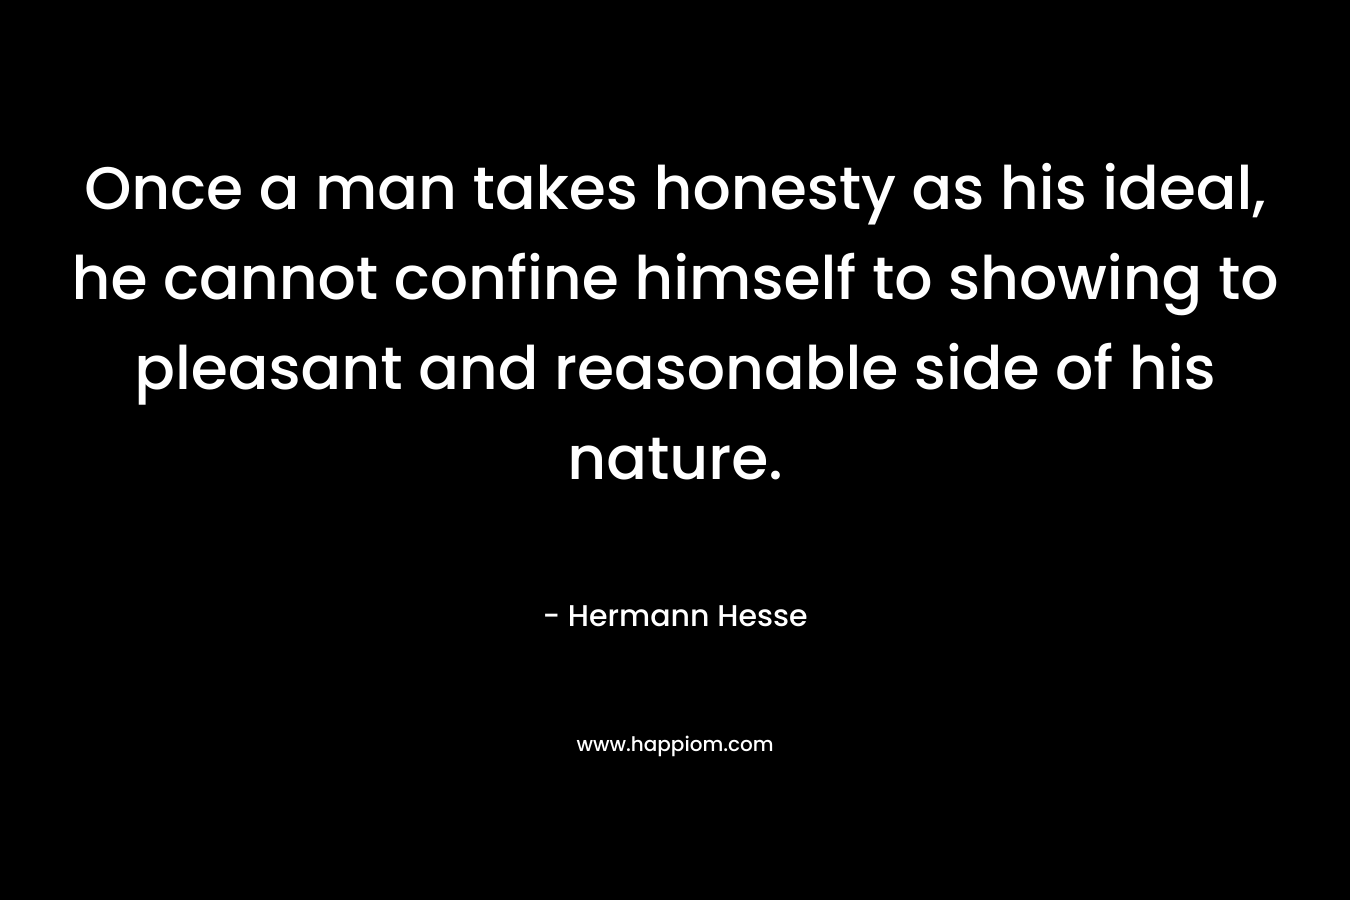 Once a man takes honesty as his ideal, he cannot confine himself to showing to pleasant and reasonable side of his nature. – Hermann Hesse